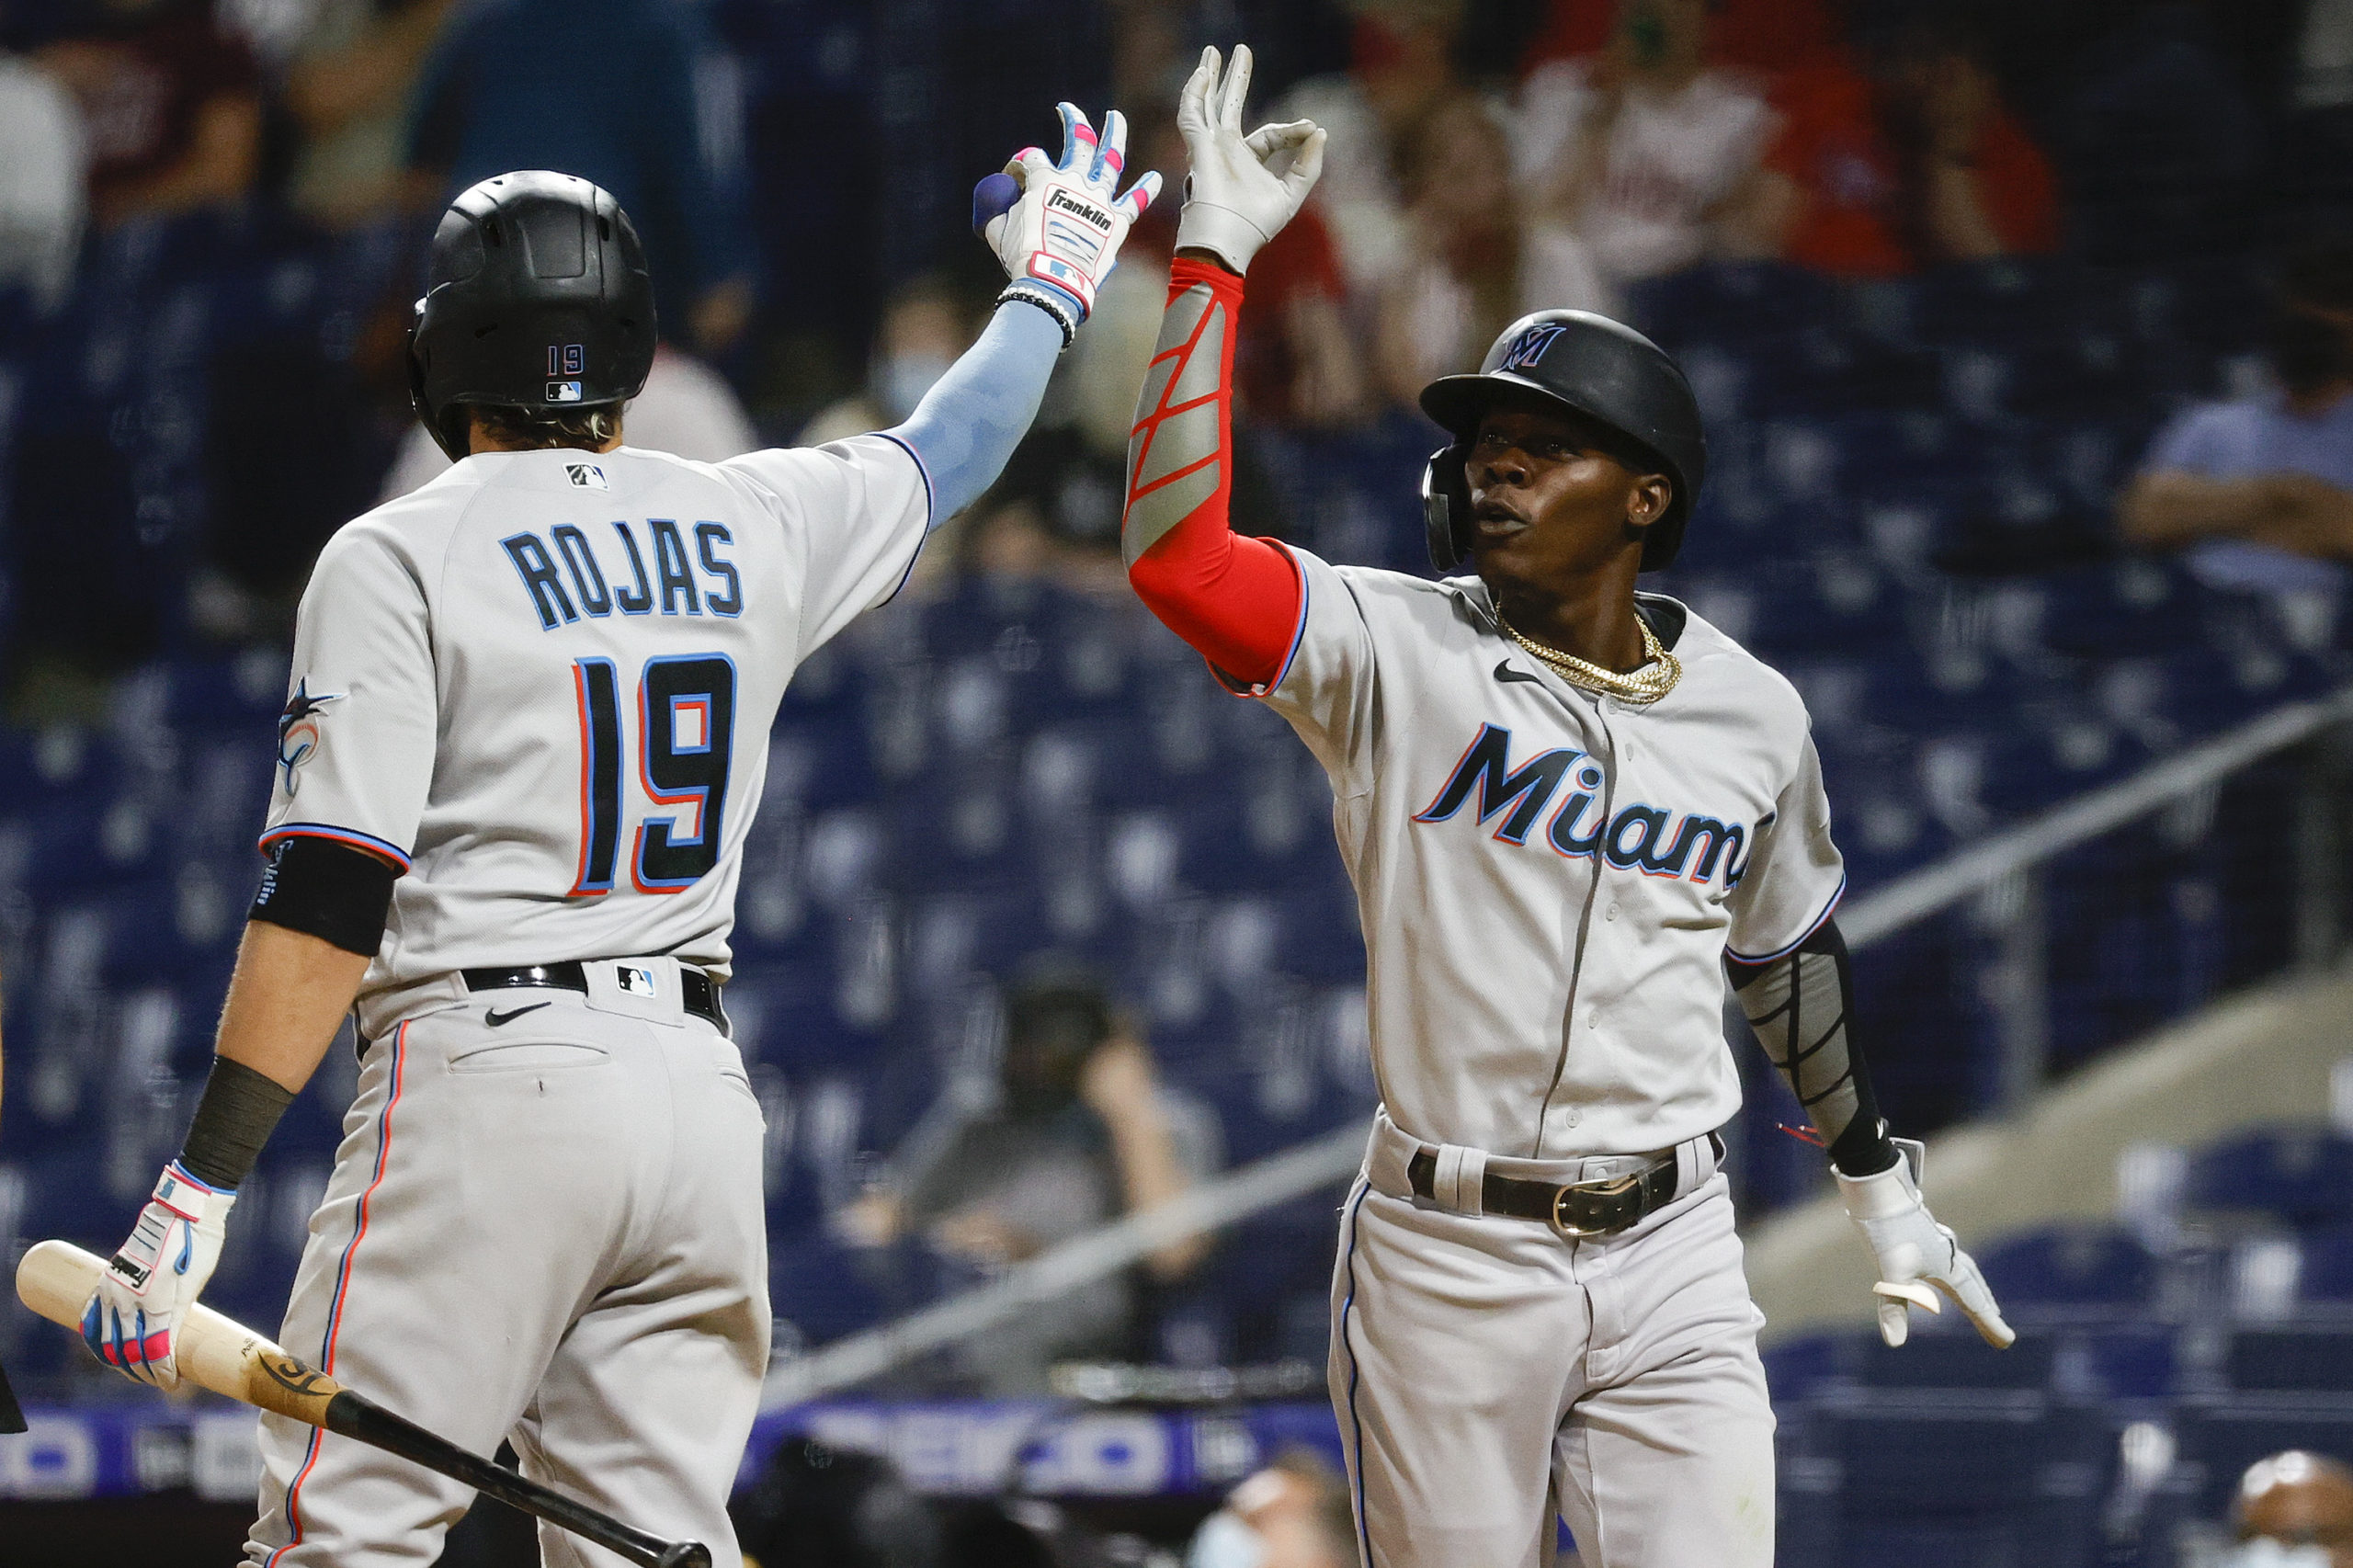 PHILADELPHIA, PENNSYLVANIA - MAY 18: Jazz Chisholm Jr. #2 (R) of the Miami Marlins celebrates with teammate Miguel Rojas #19 after hitting a two-run home run during the eighth inning against the Philadelphia Phillies at Citizens Bank Park on May 18, 2021 in Philadelphia, Pennsylvania. Tim Nwachukwu/Getty Images